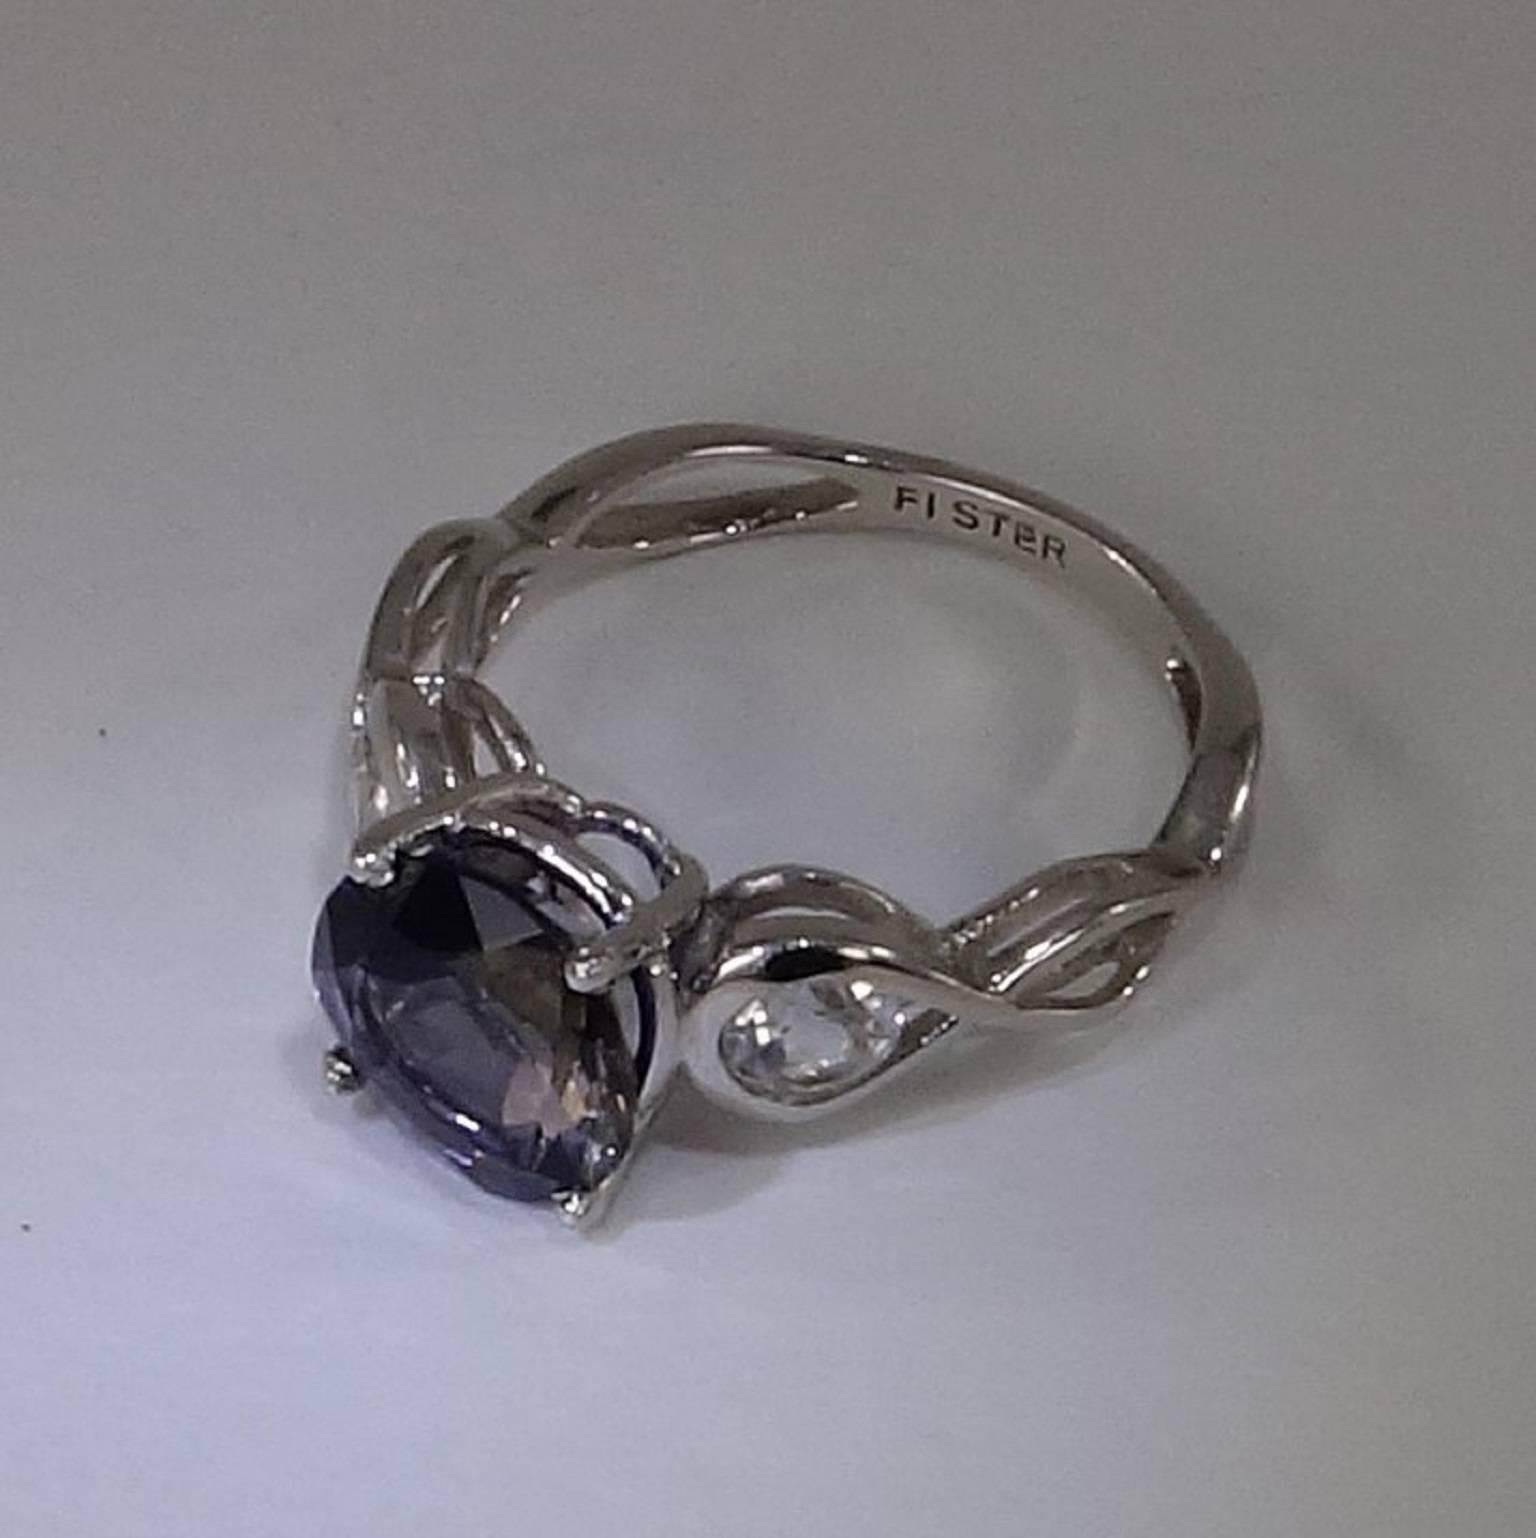 Lovely Sterling Silver ring of round blue Iolite accented with Silver Topaz. Iolite gemstones are trichroic and will flash gray or straw depending on the angle at which they are viewed. The Iolite is 2.09ct and the Silver Topaz total weight is 0.60